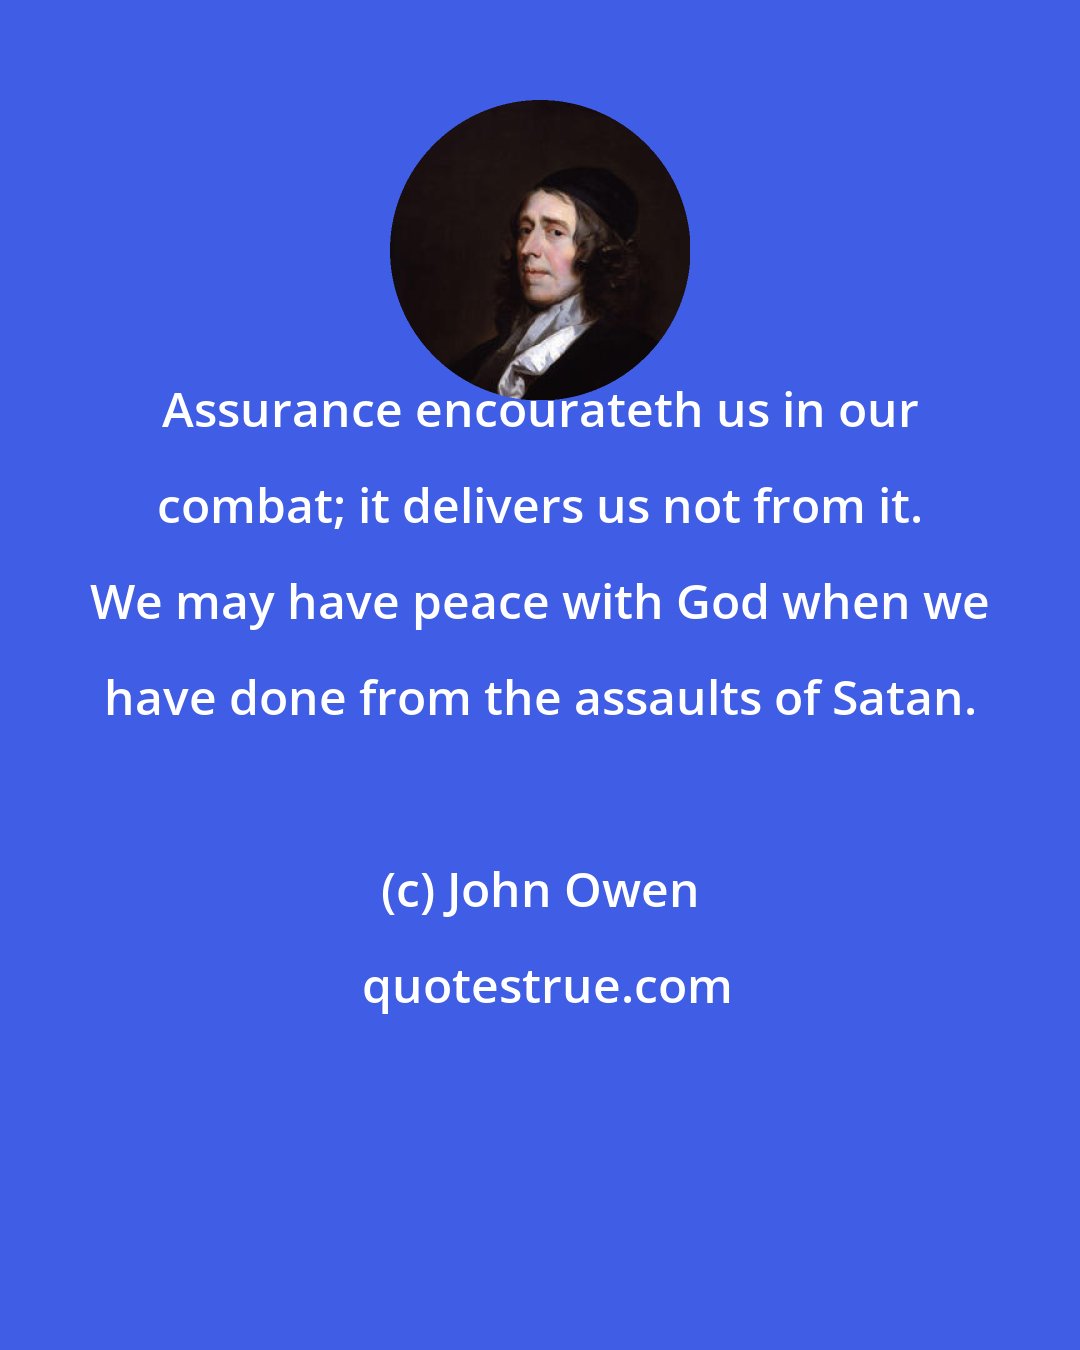 John Owen: Assurance encourateth us in our combat; it delivers us not from it. We may have peace with God when we have done from the assaults of Satan.